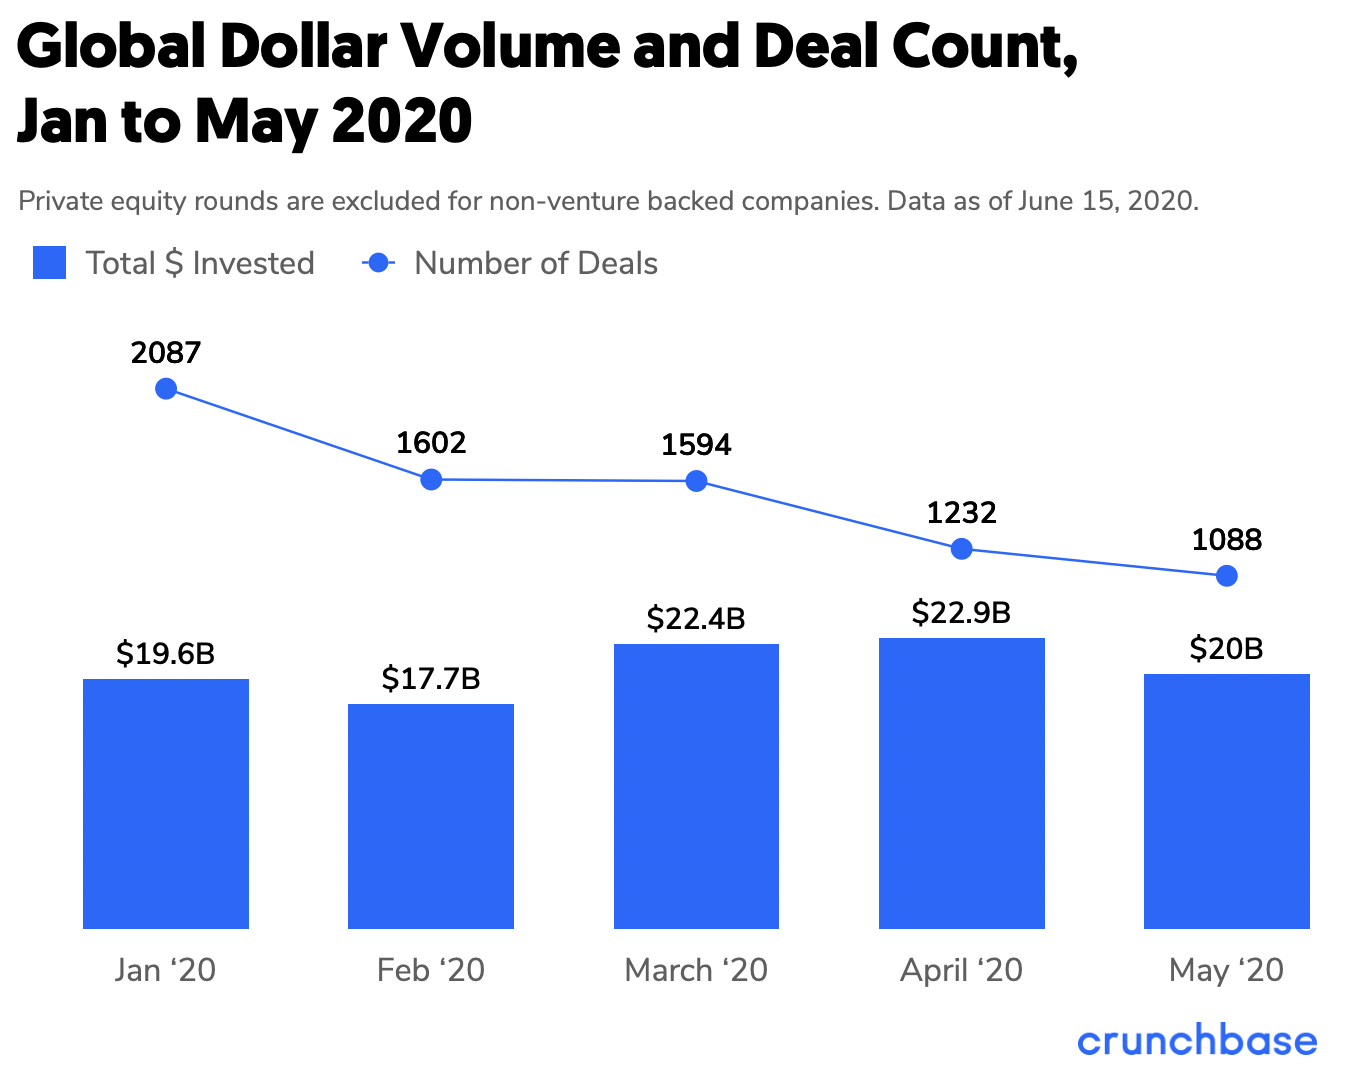 Monthly global funding and deal count data